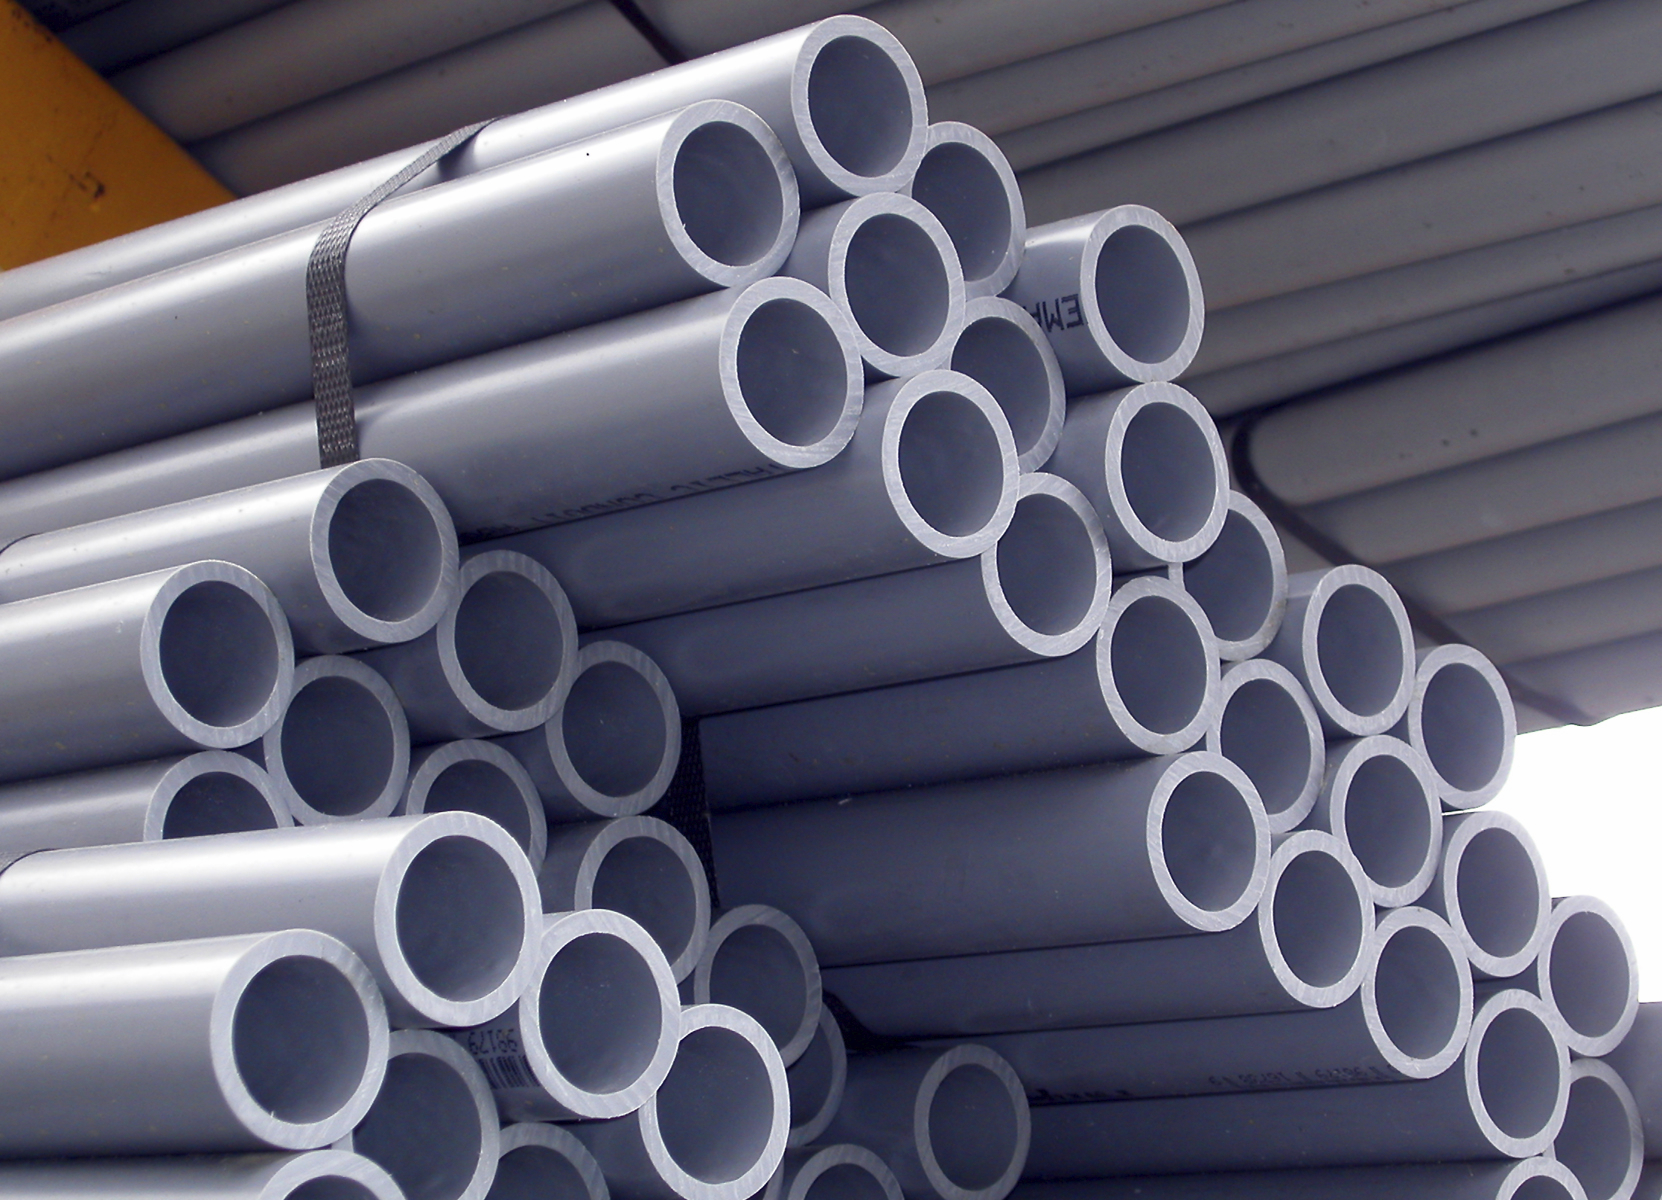 See PVC Industrial Products for PVC, CPVC, PP, HDPE, and PVDF Pipe